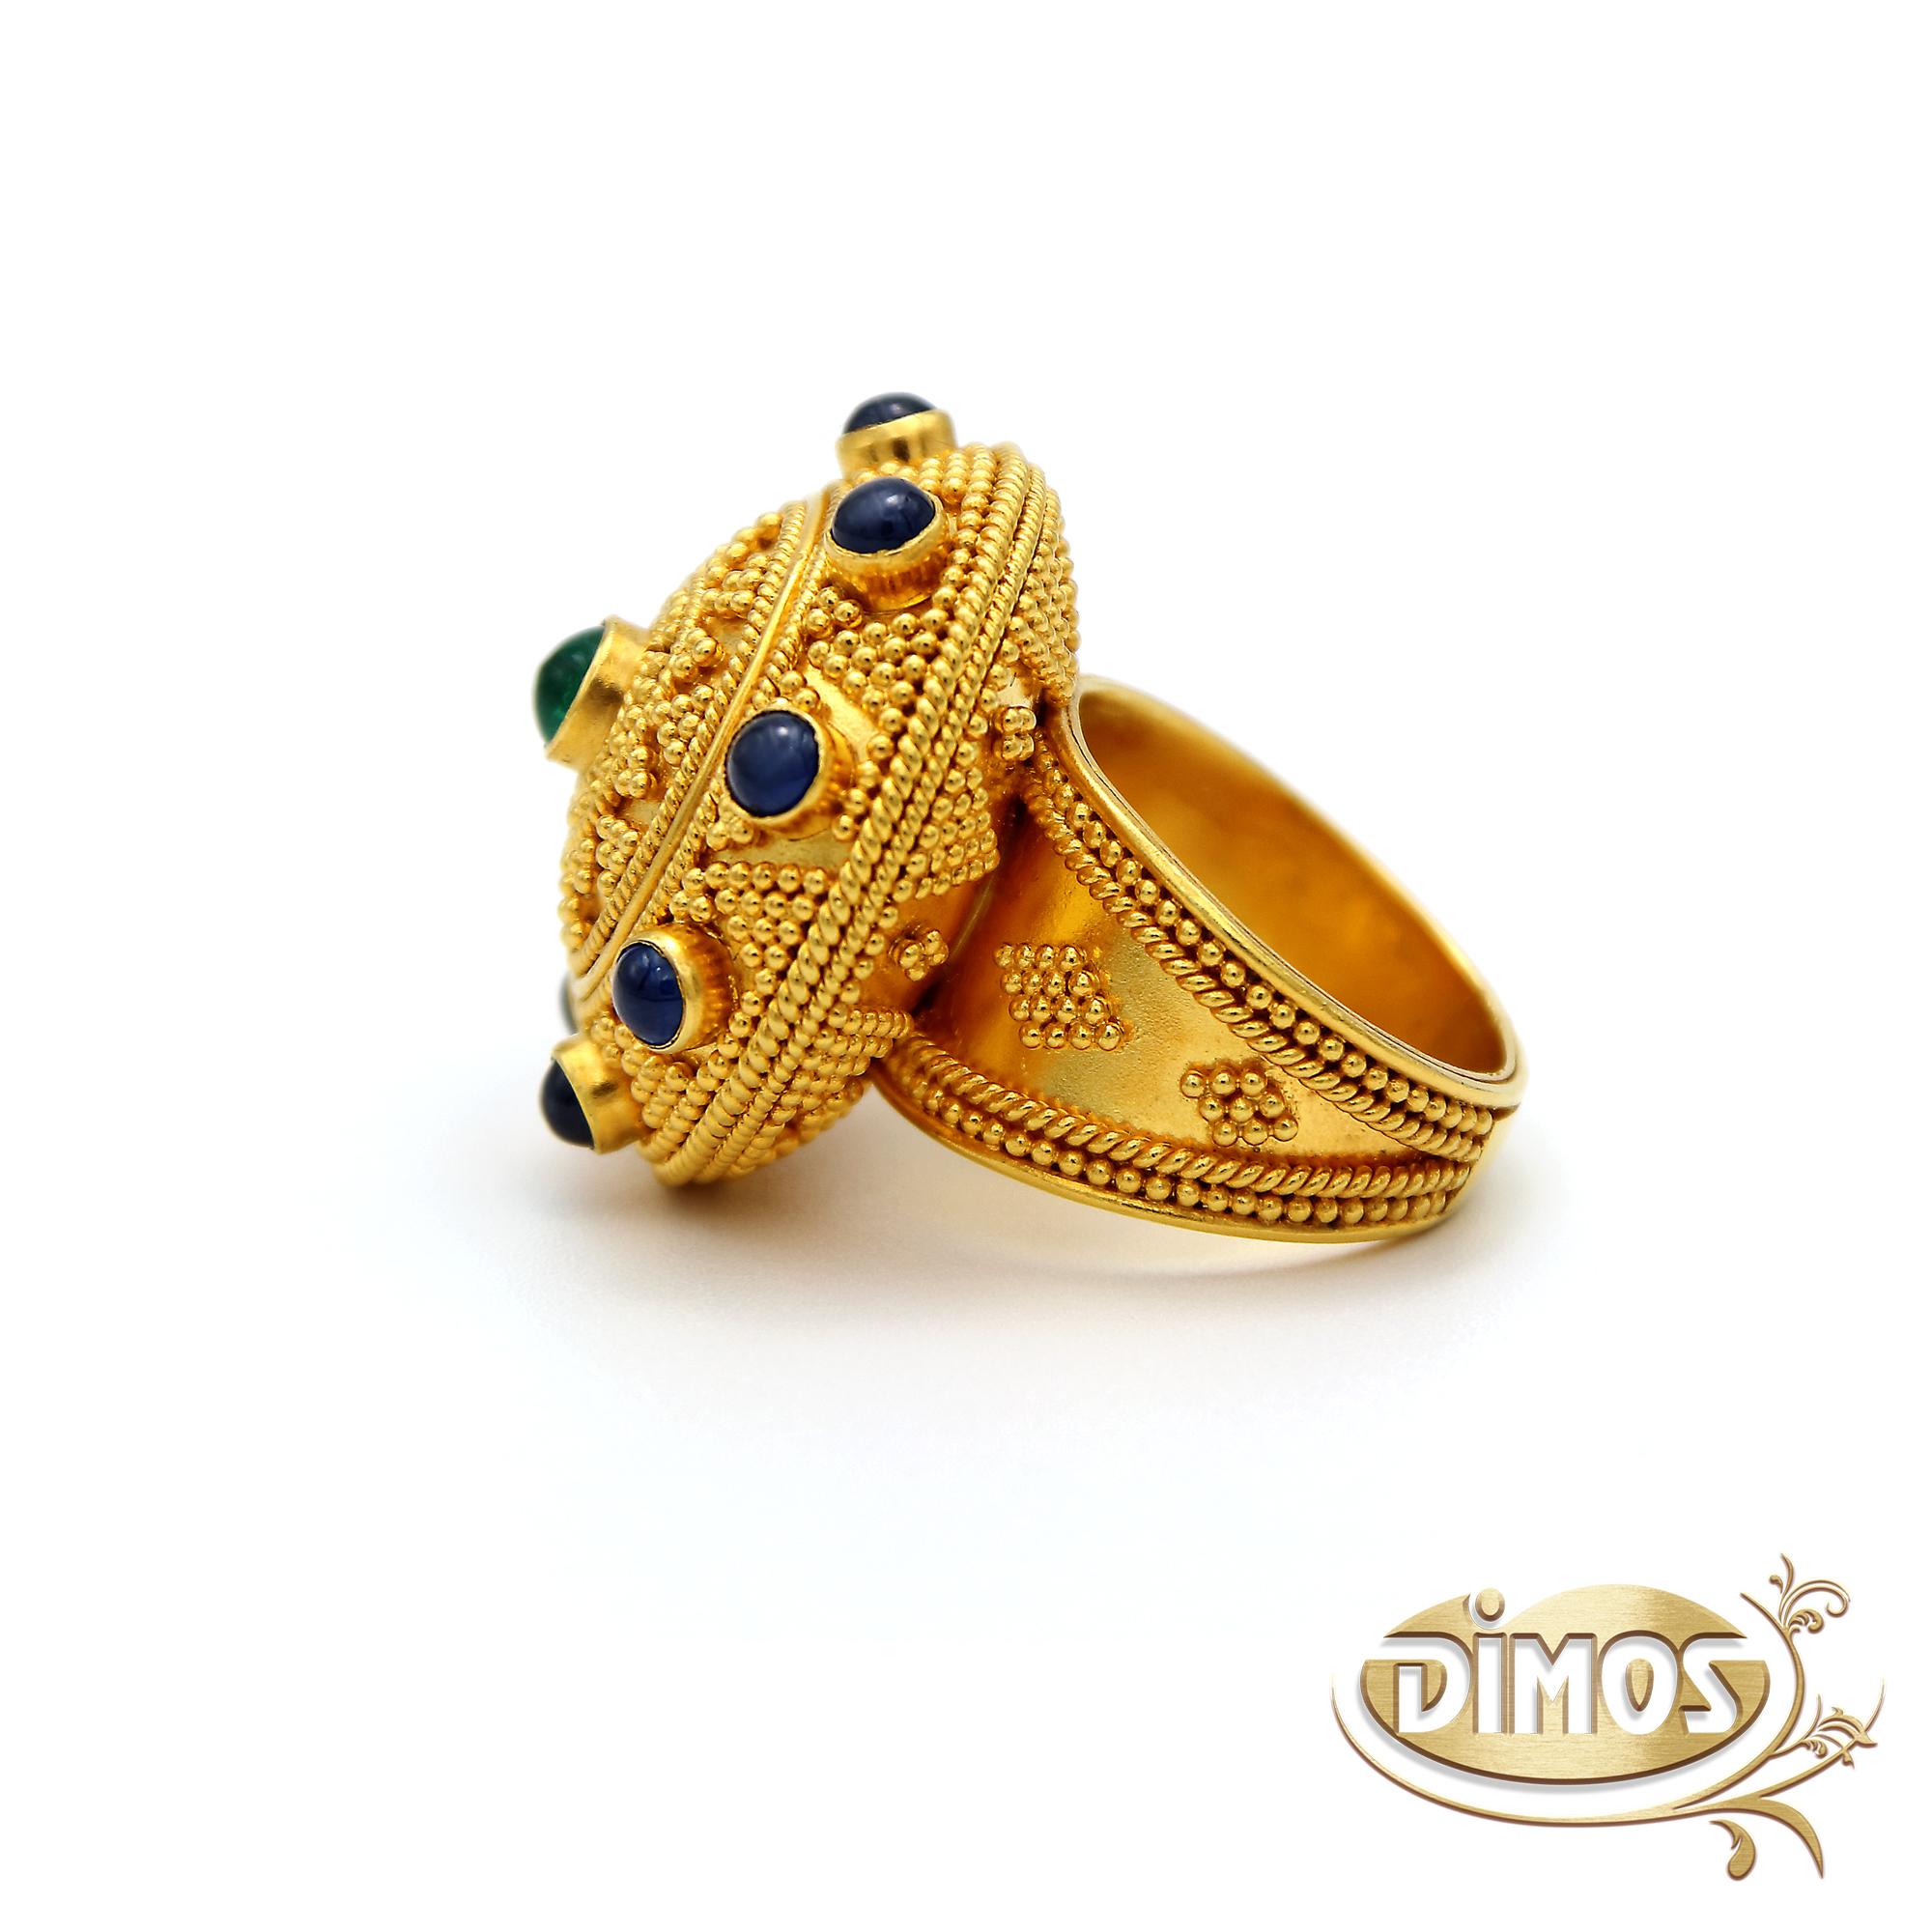 Dimos 22k Gold Byzantine Dome Cocktail Ring  For Sale 1